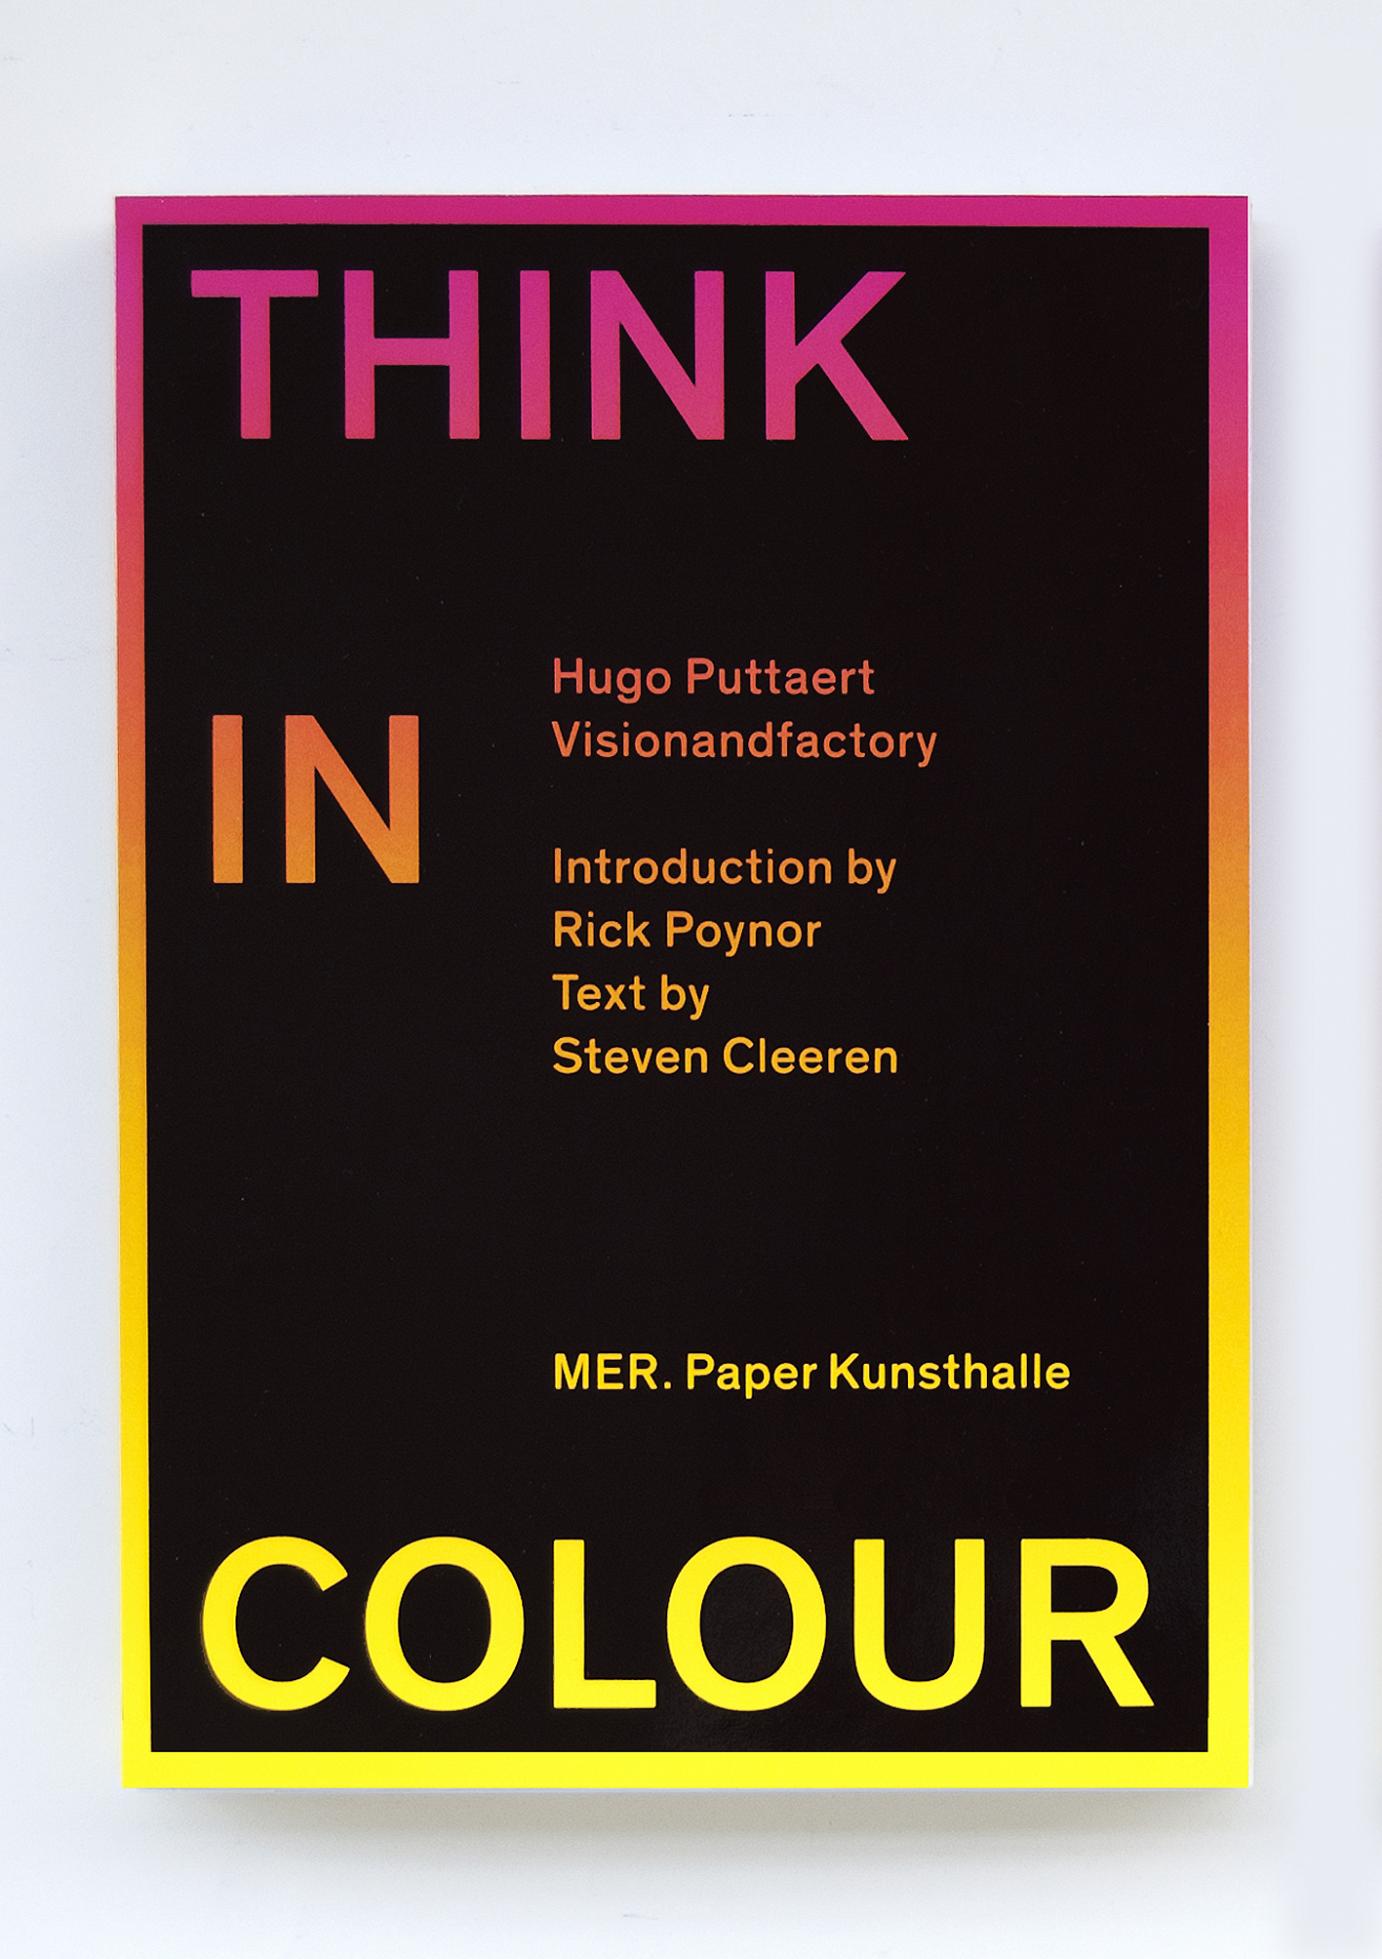 The book is available in three cover versions, yellow-red, green, blue and magenta-purple.